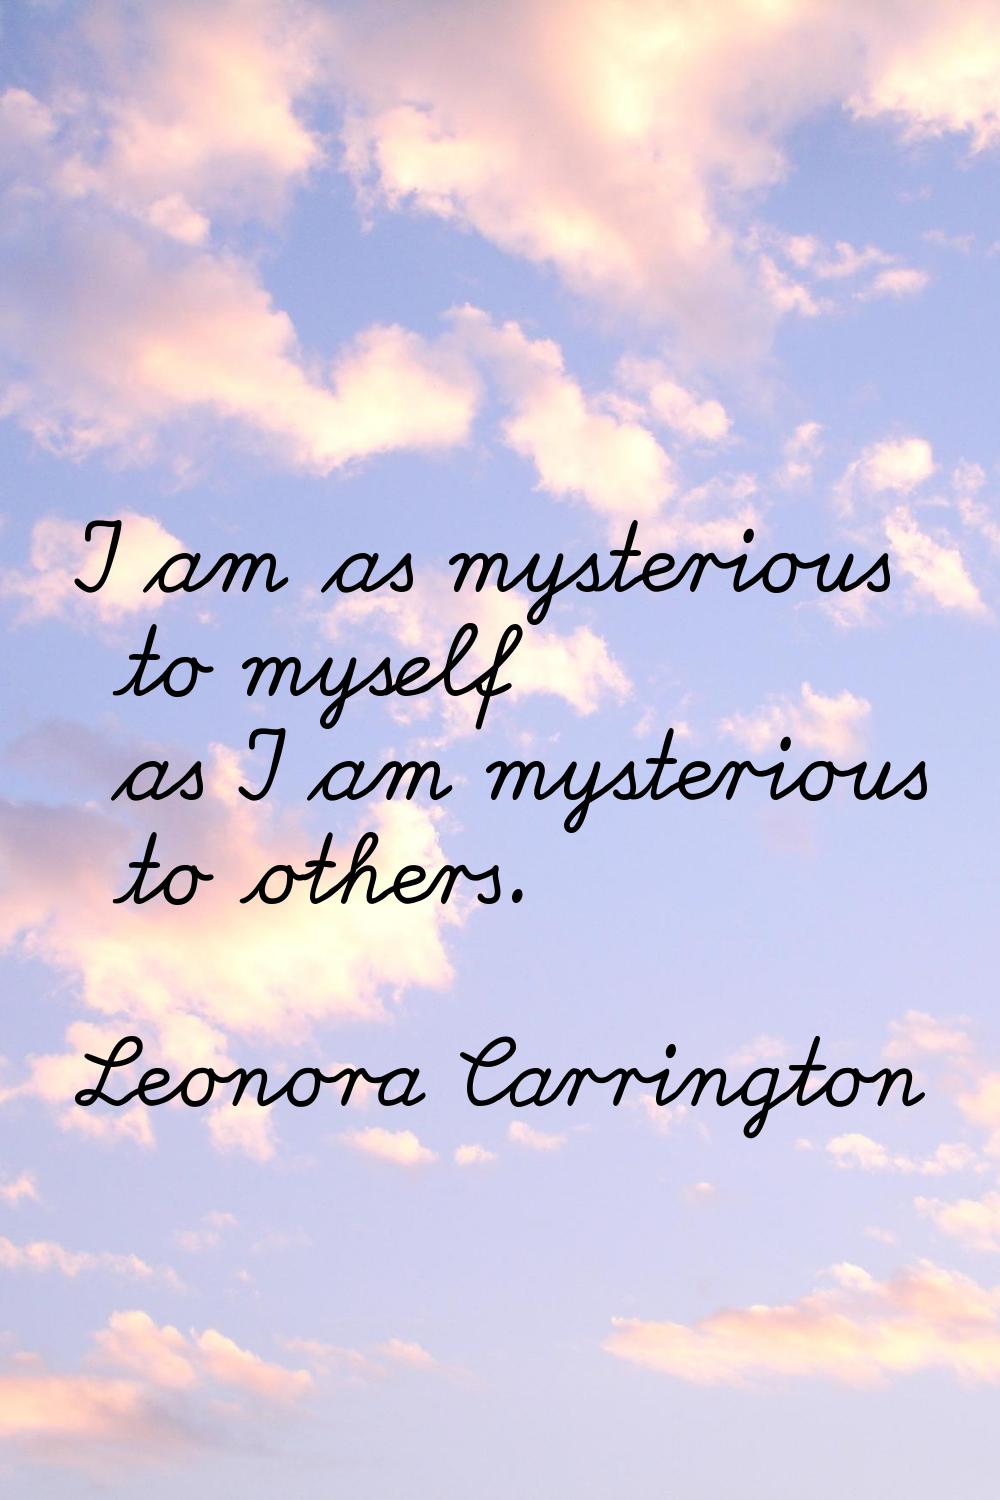 I am as mysterious to myself as I am mysterious to others.